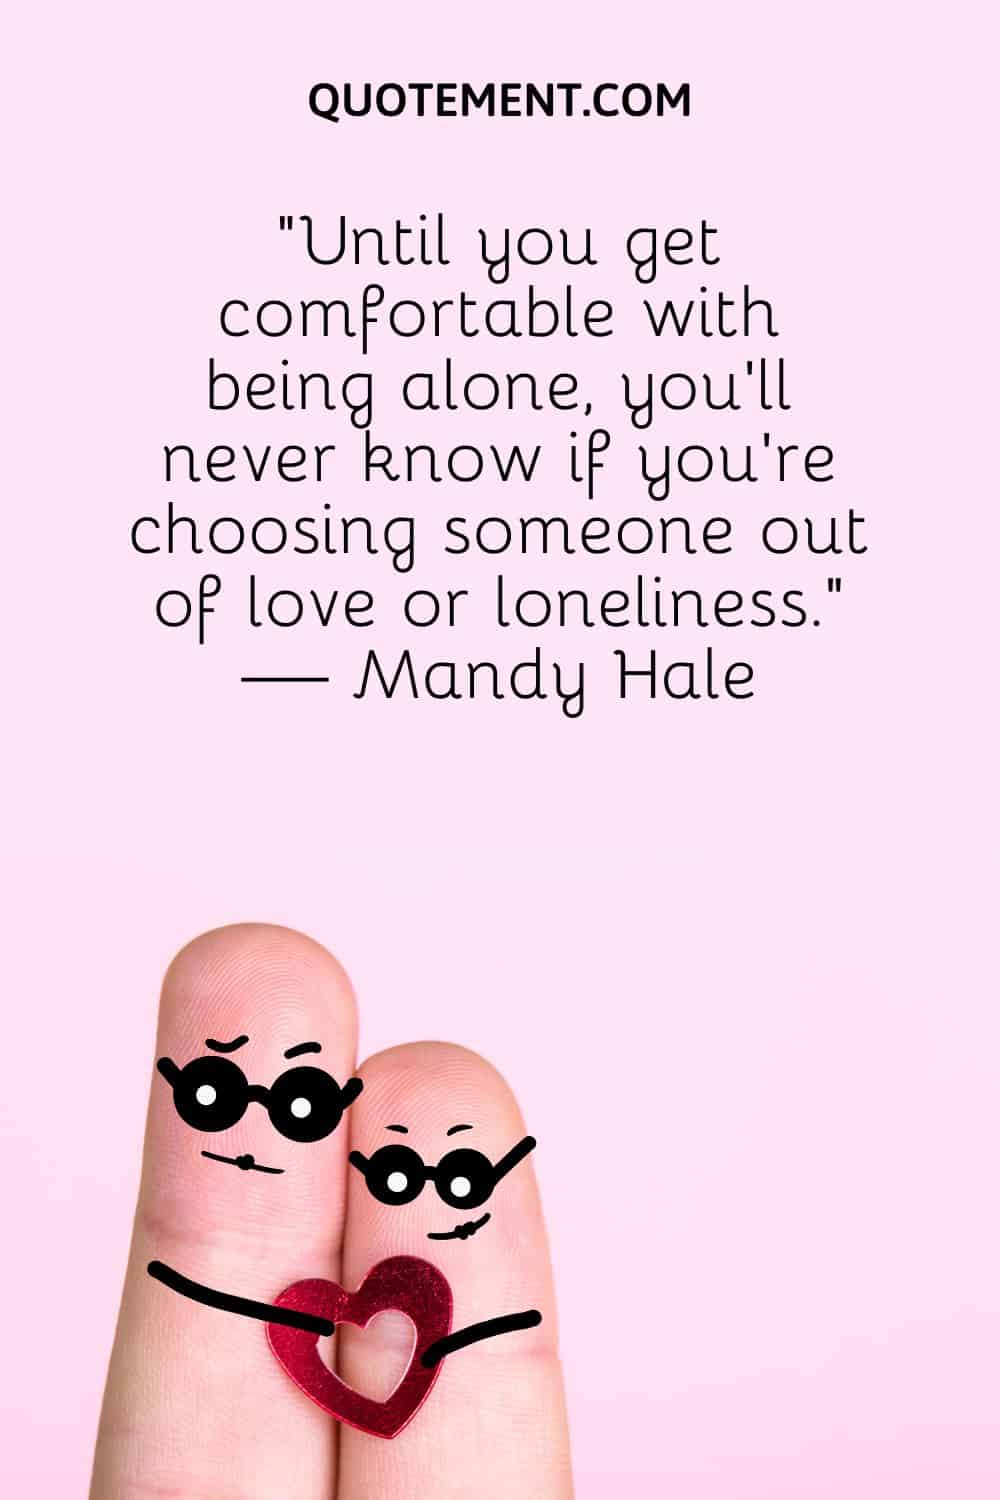 “Until you get comfortable with being alone, you’ll never know if you’re choosing someone out of love or loneliness.” — Mandy Hale